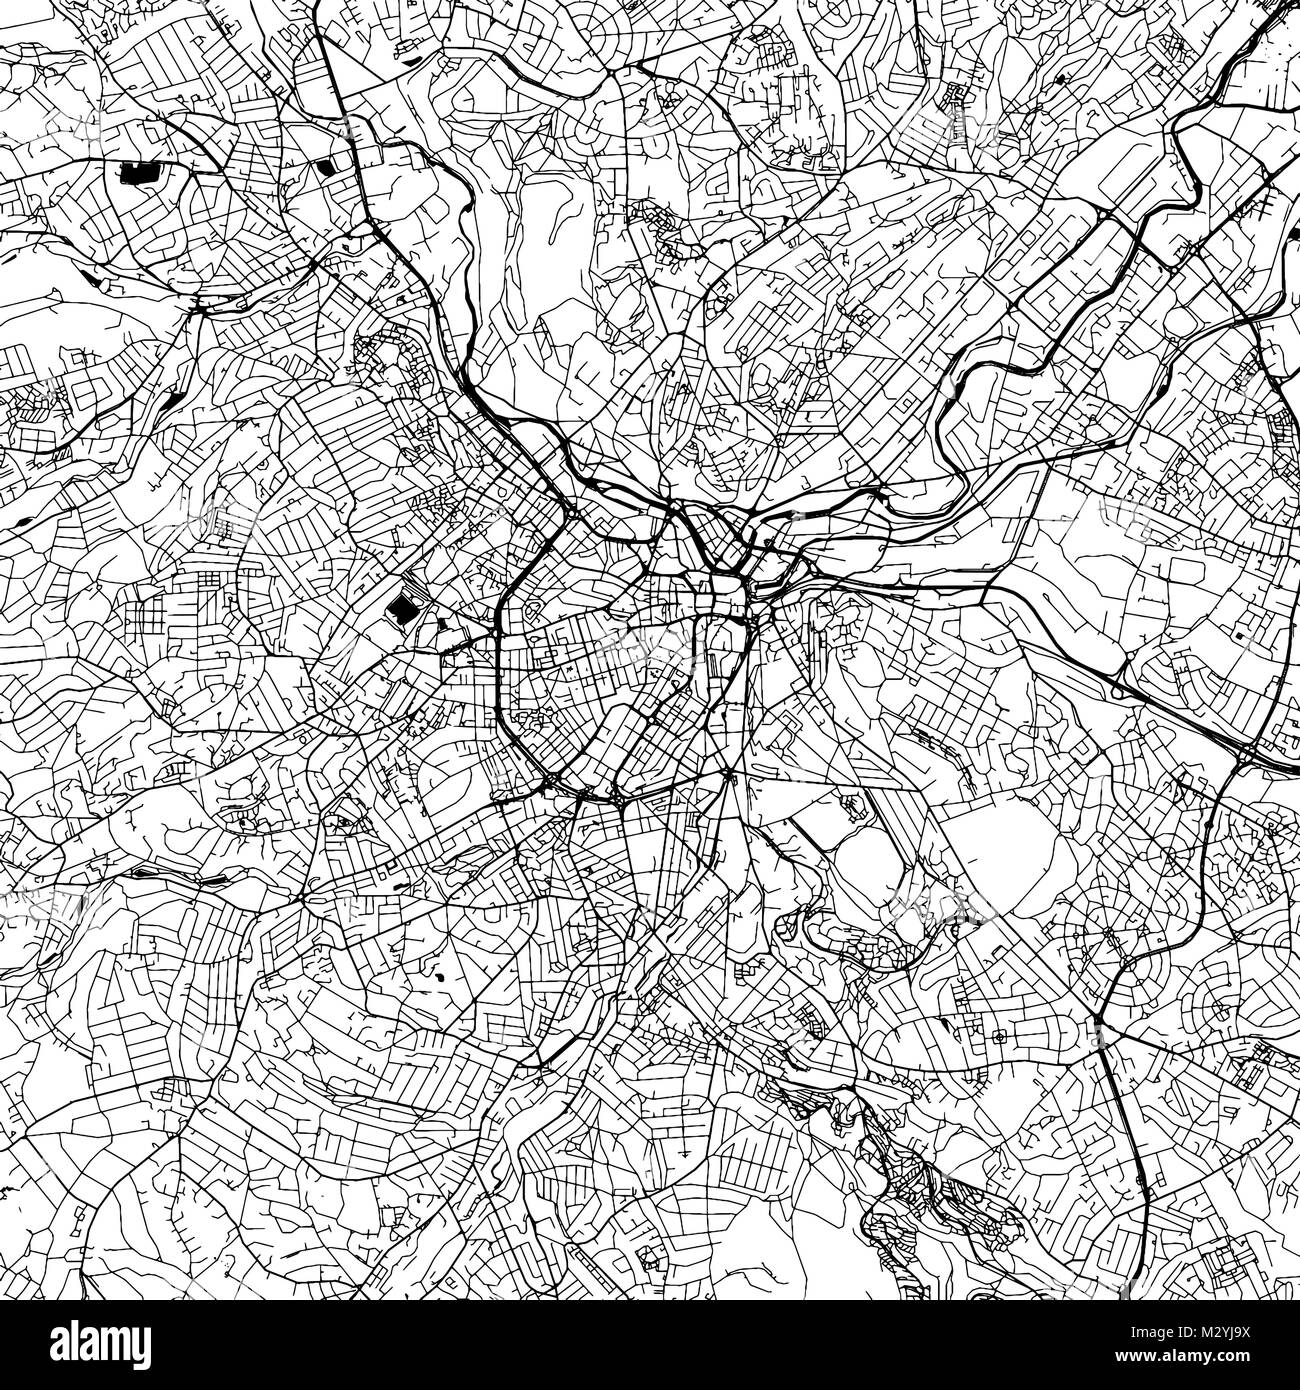 Sheffield Downtown Vector Map Monochrome Artprint, Outline Version for Infographic Background, Black Streets and Waterways Stock Vector